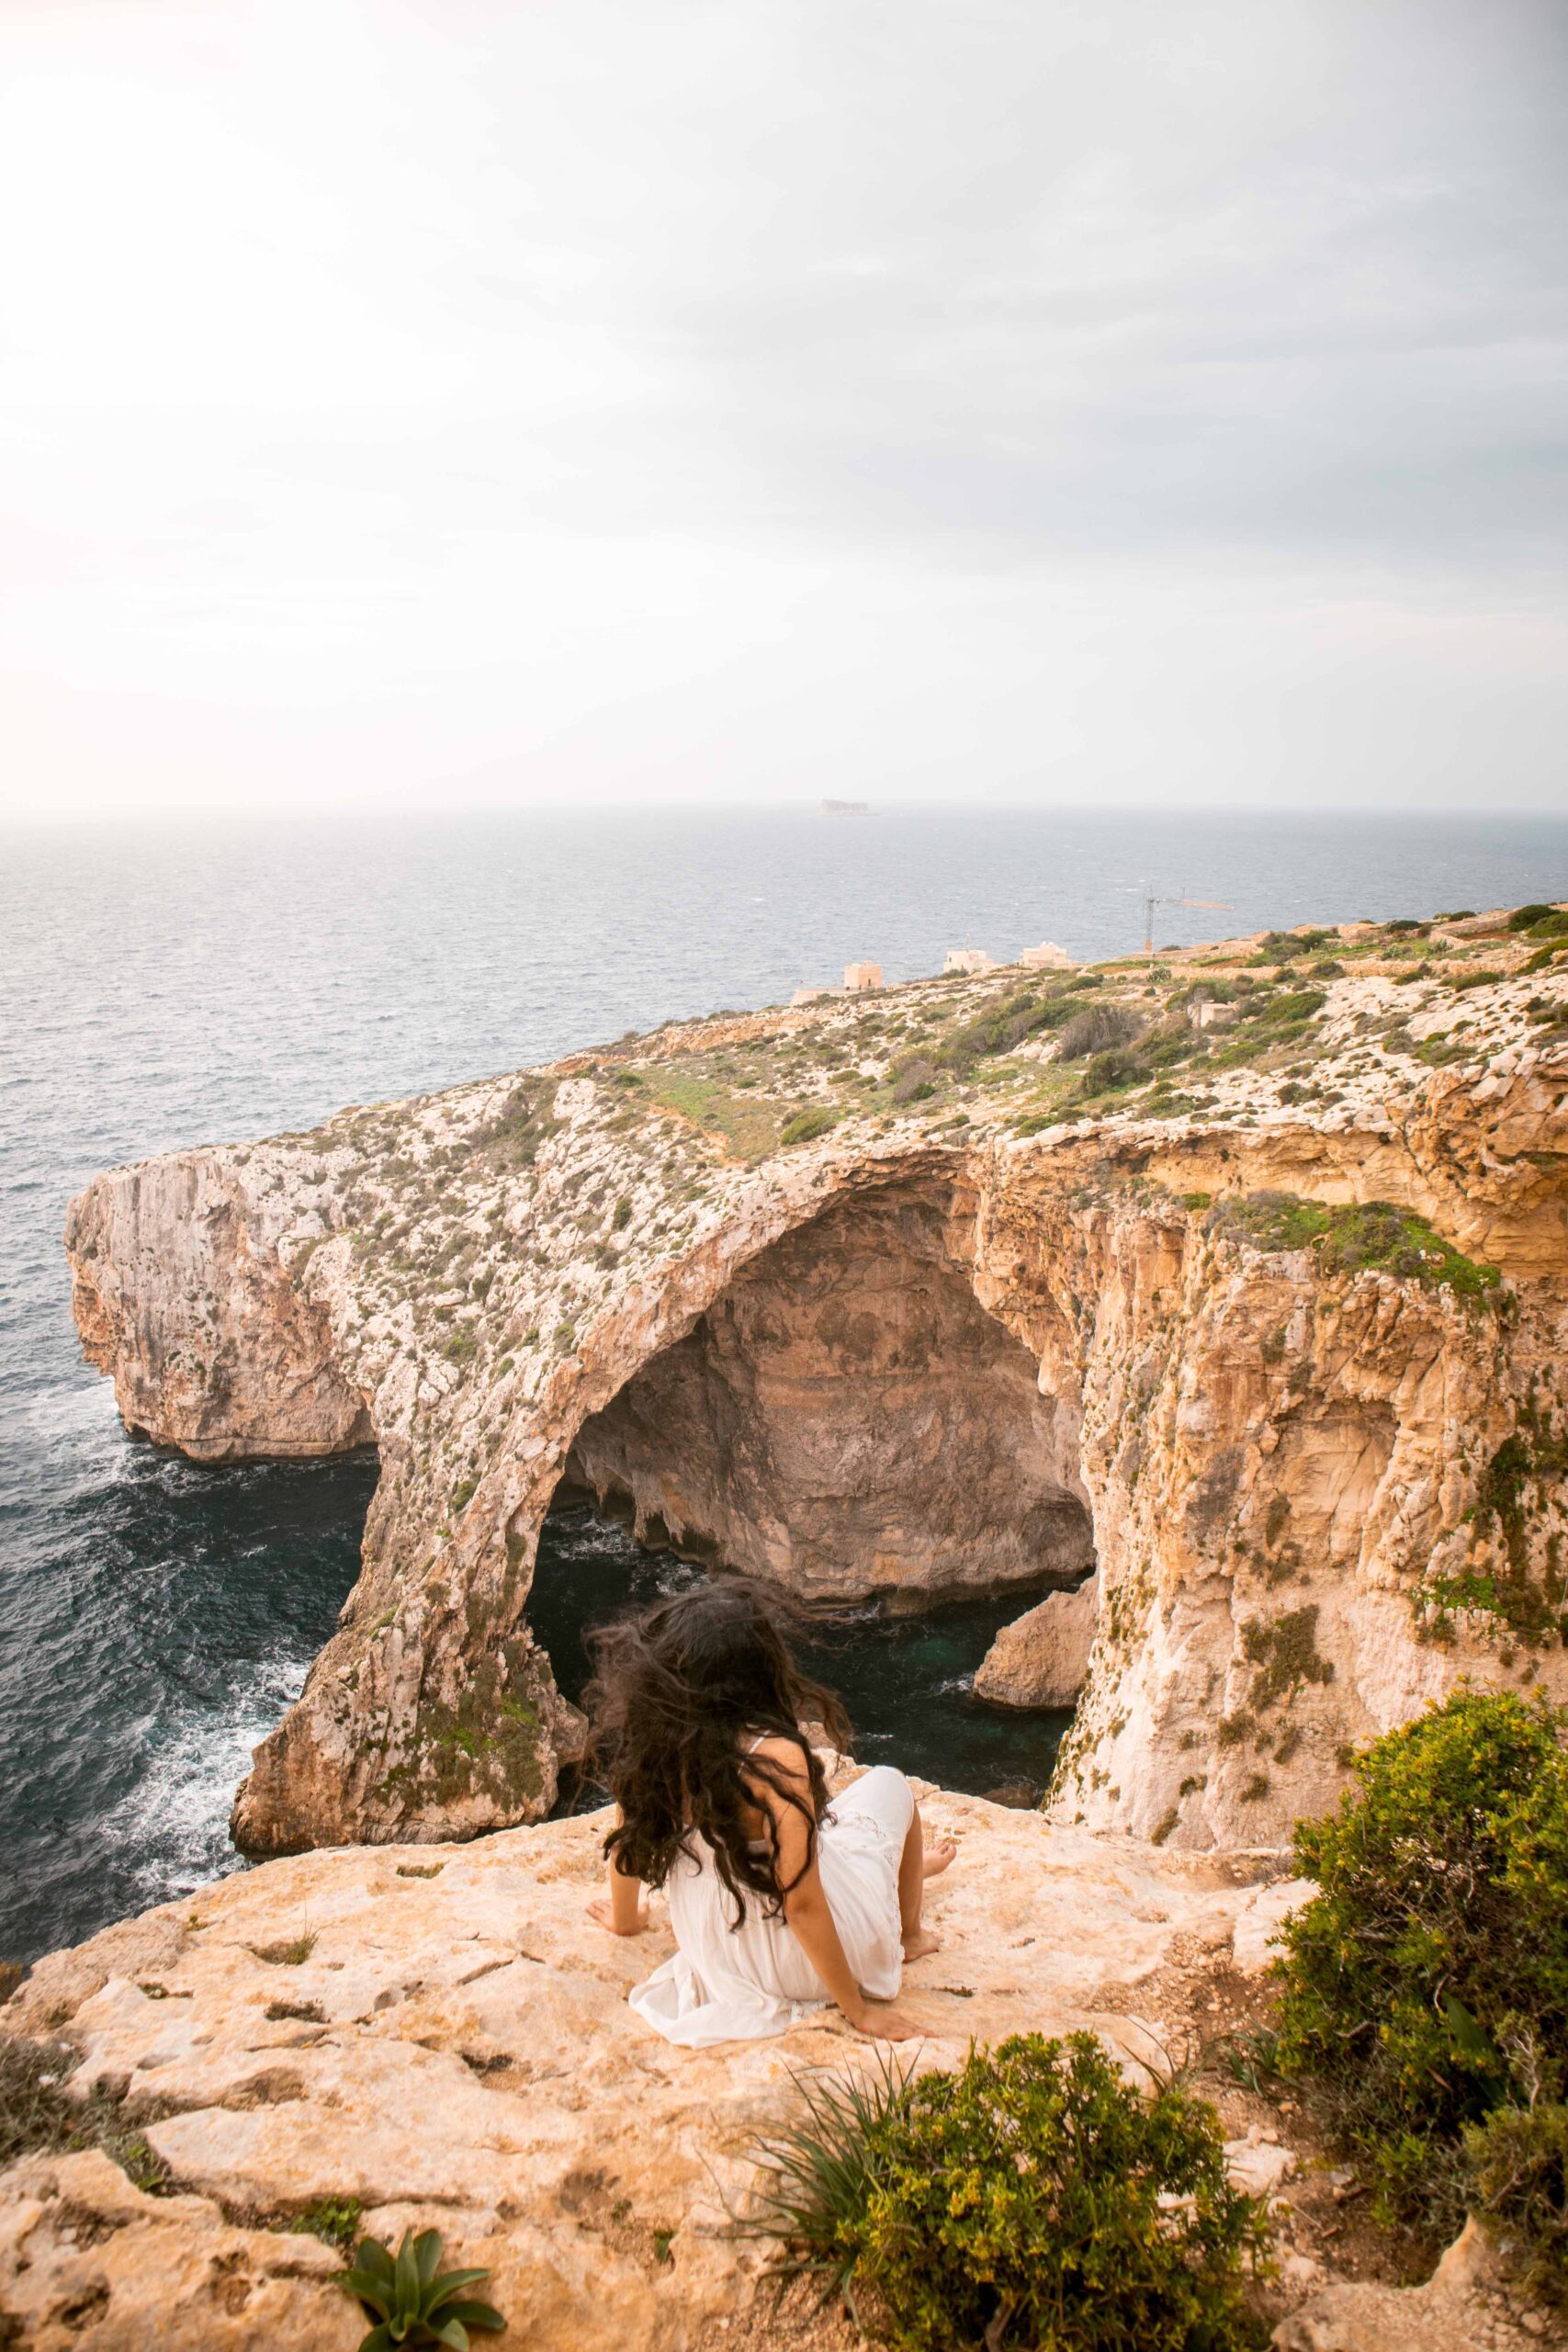 Woman wearing a white dress sitting on a cliff to watch the Blue Grotto from a Viewpoint in Wied Iż-Żurrieq, Malta